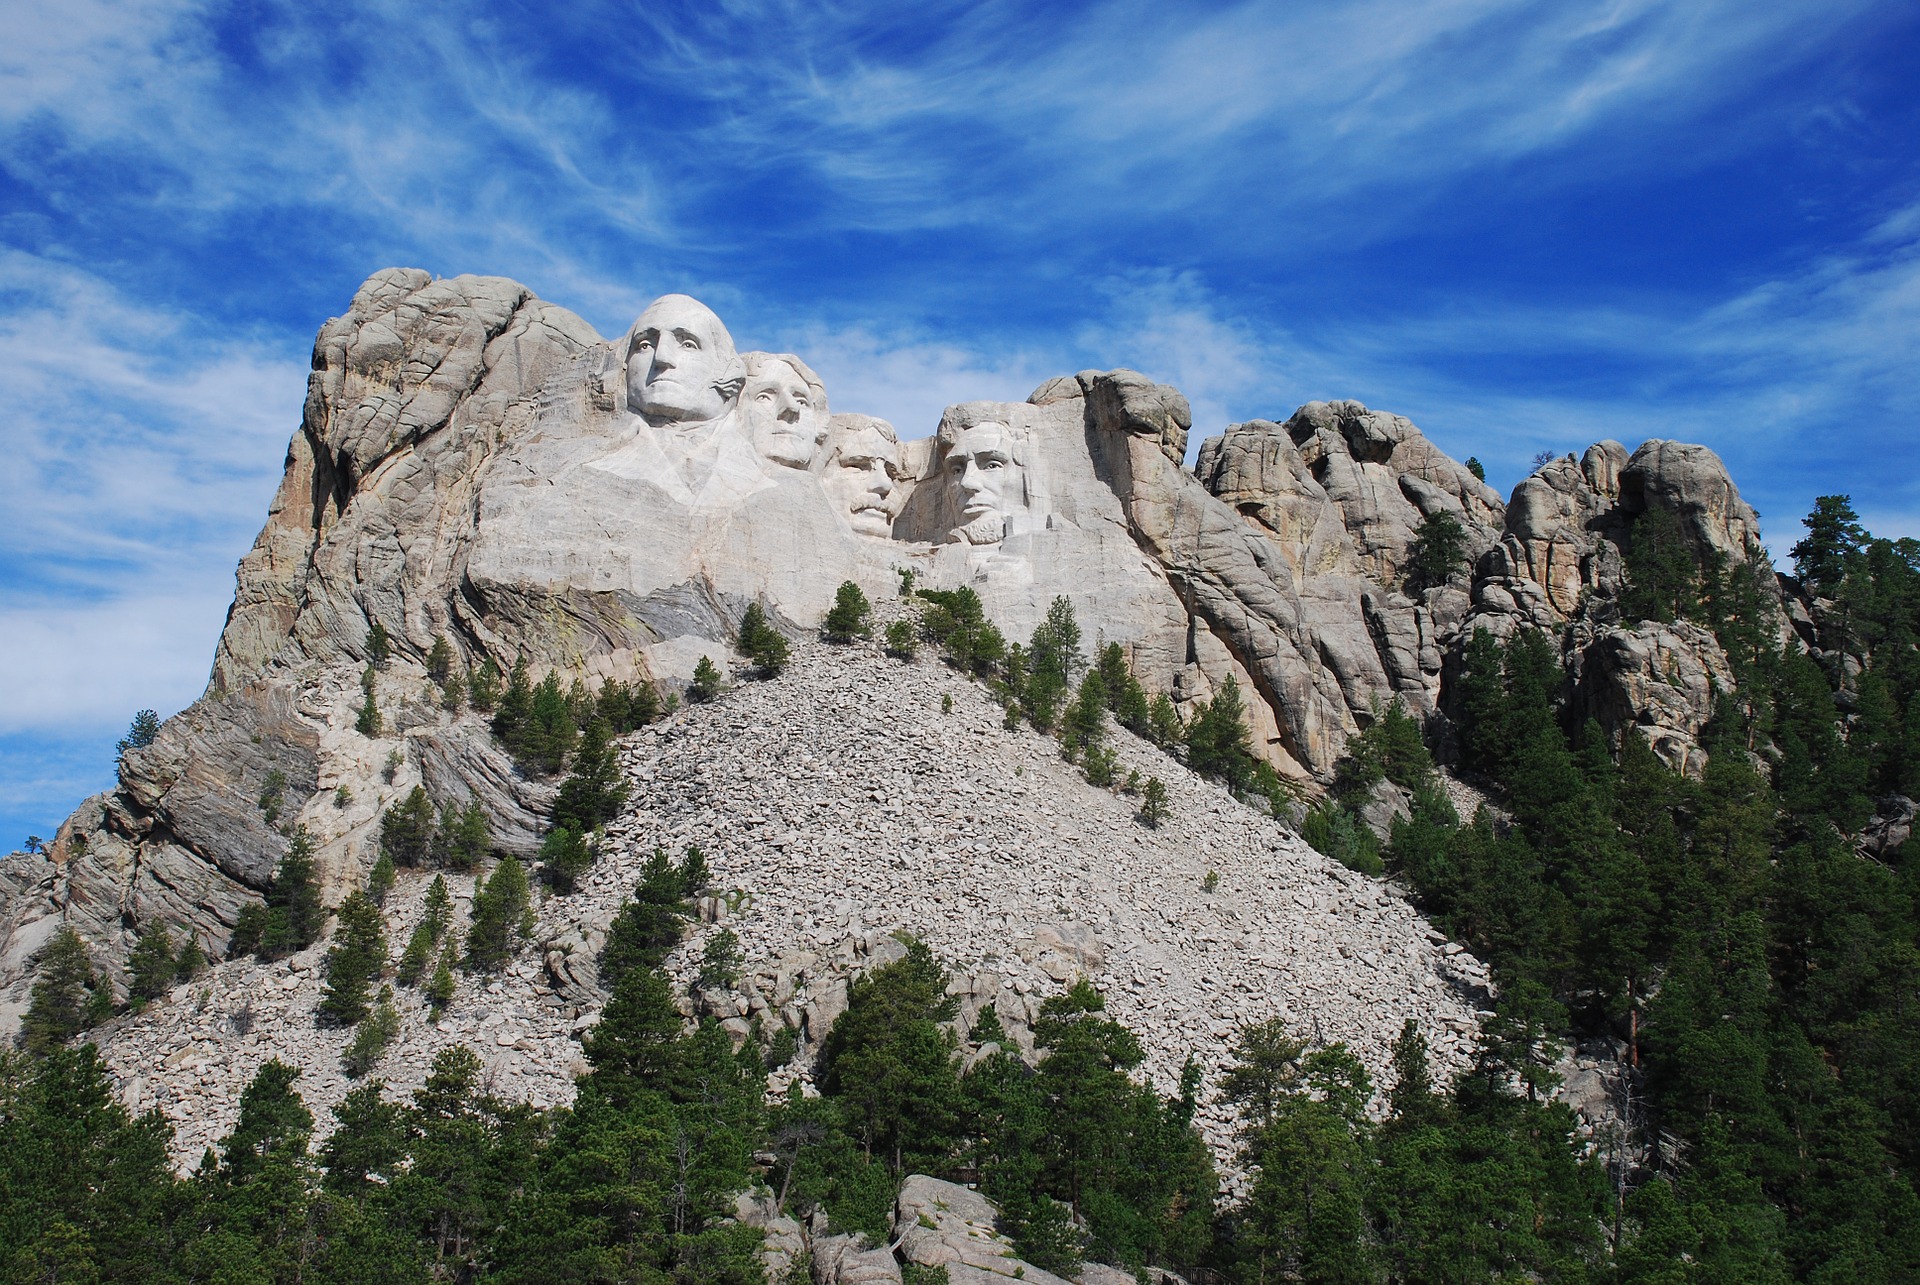 Mt. Rushmore – A Must See If Visiting The Black Hills